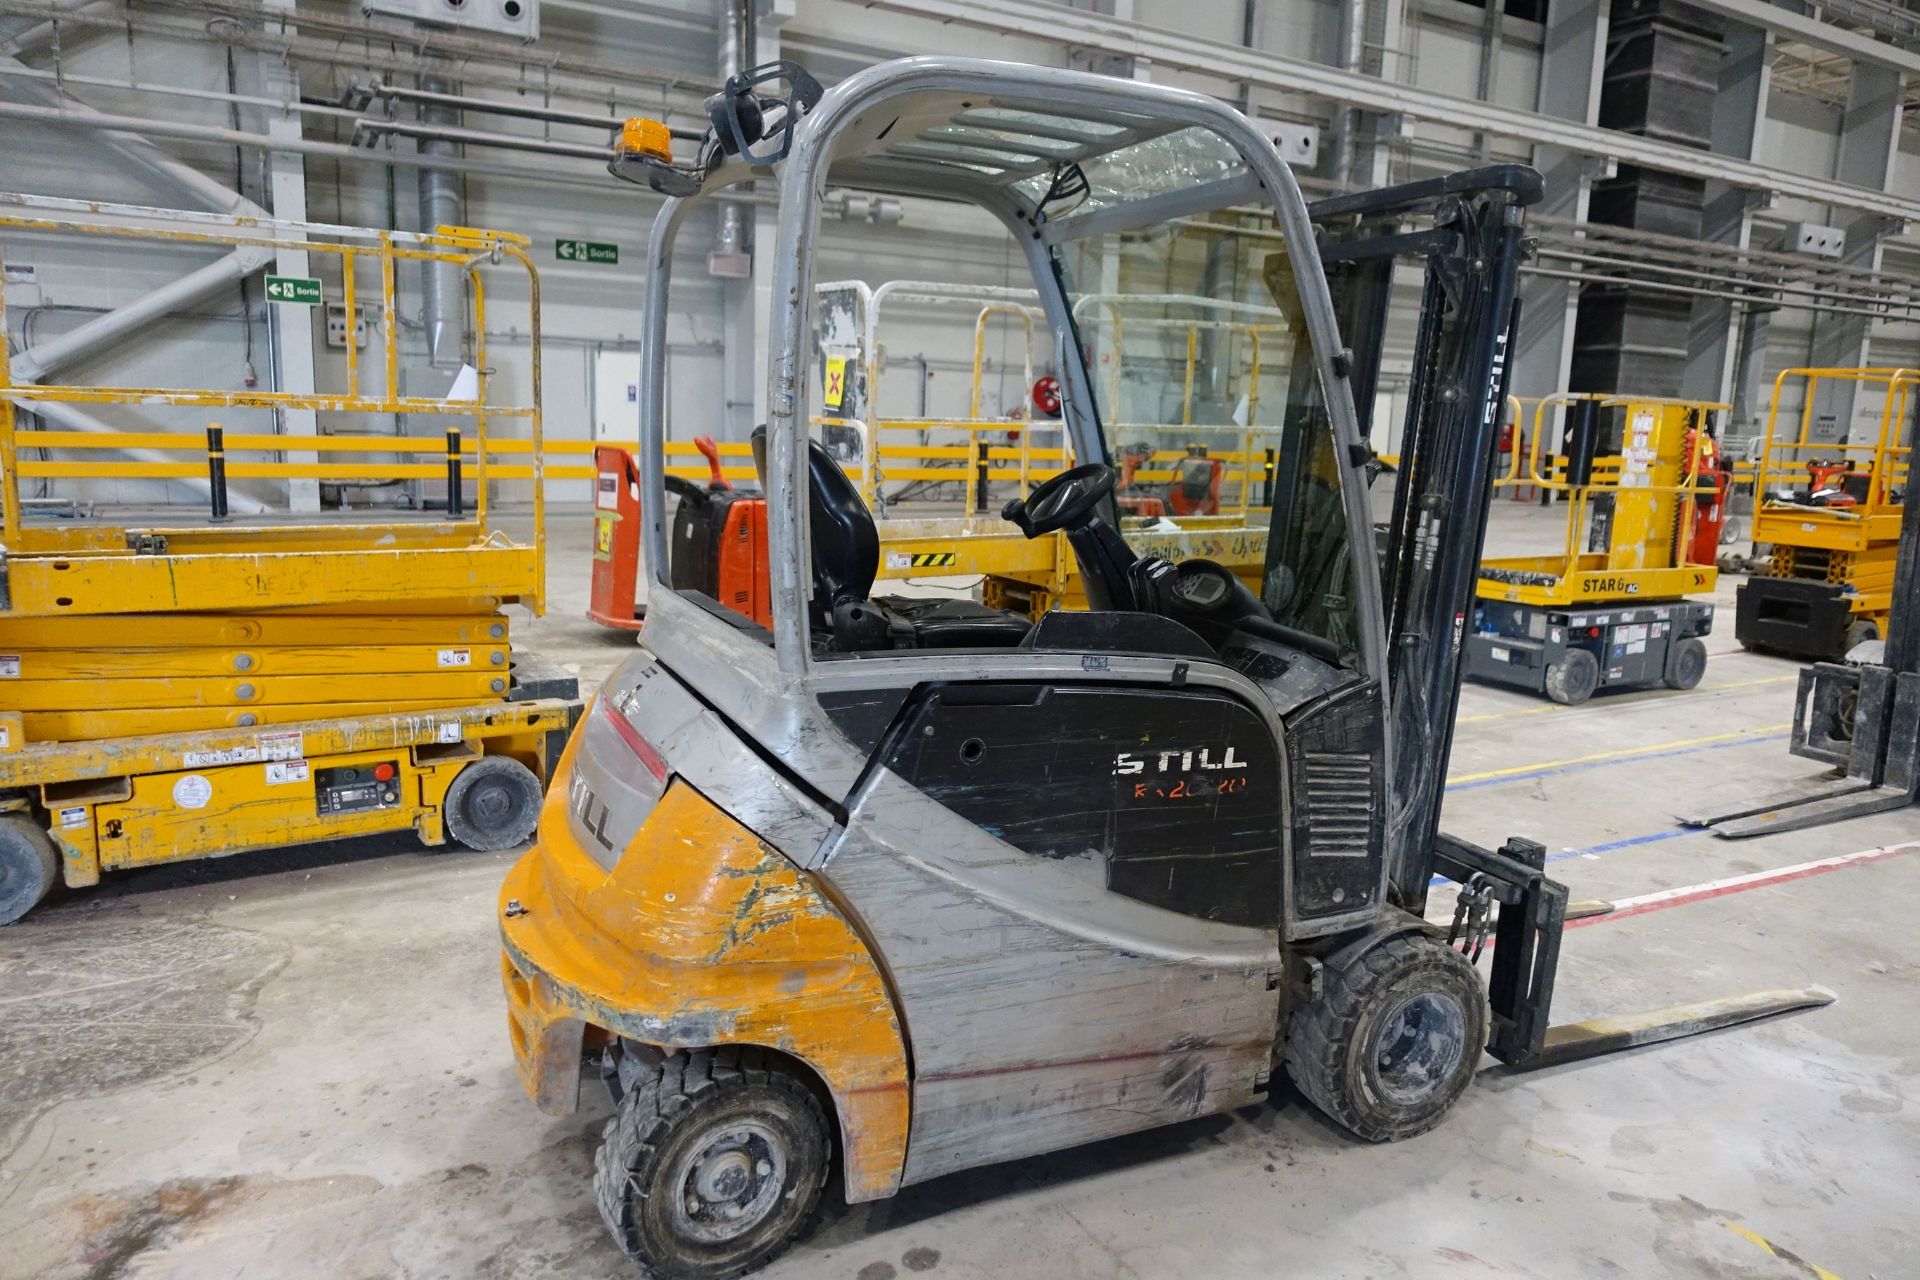 STILL RX20-20P Electric Forklift Truck, 2,000kg Capacity with Sideshift, Ser # 516216H00371 (2017) - Image 5 of 42